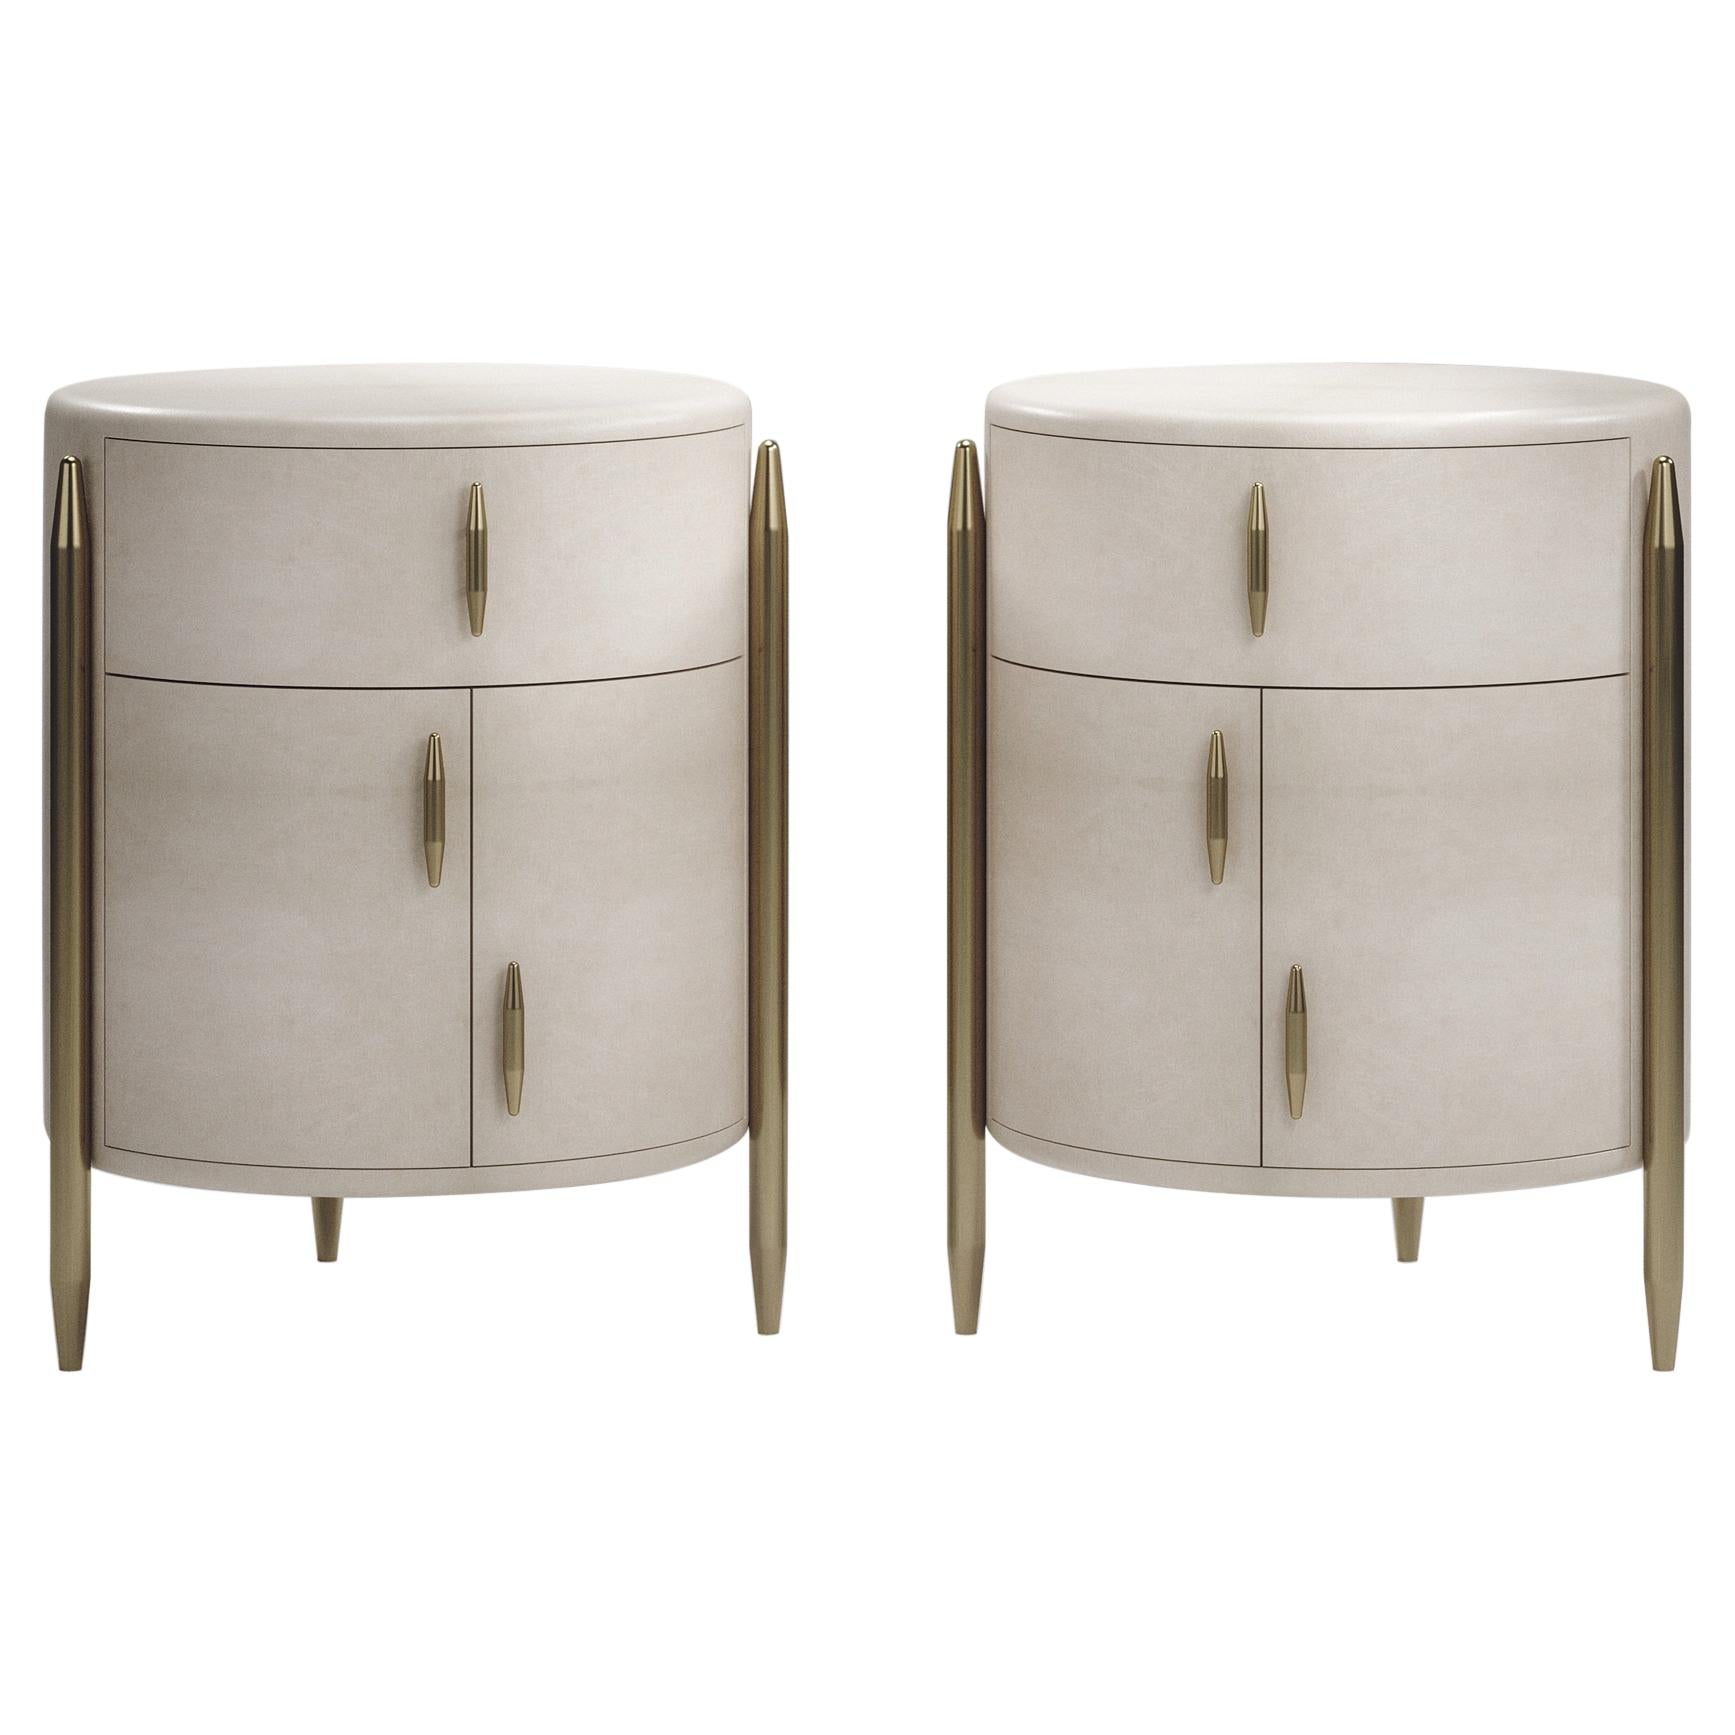 Pair of Parchment Night Stands with Brass Accents by Kifu Paris